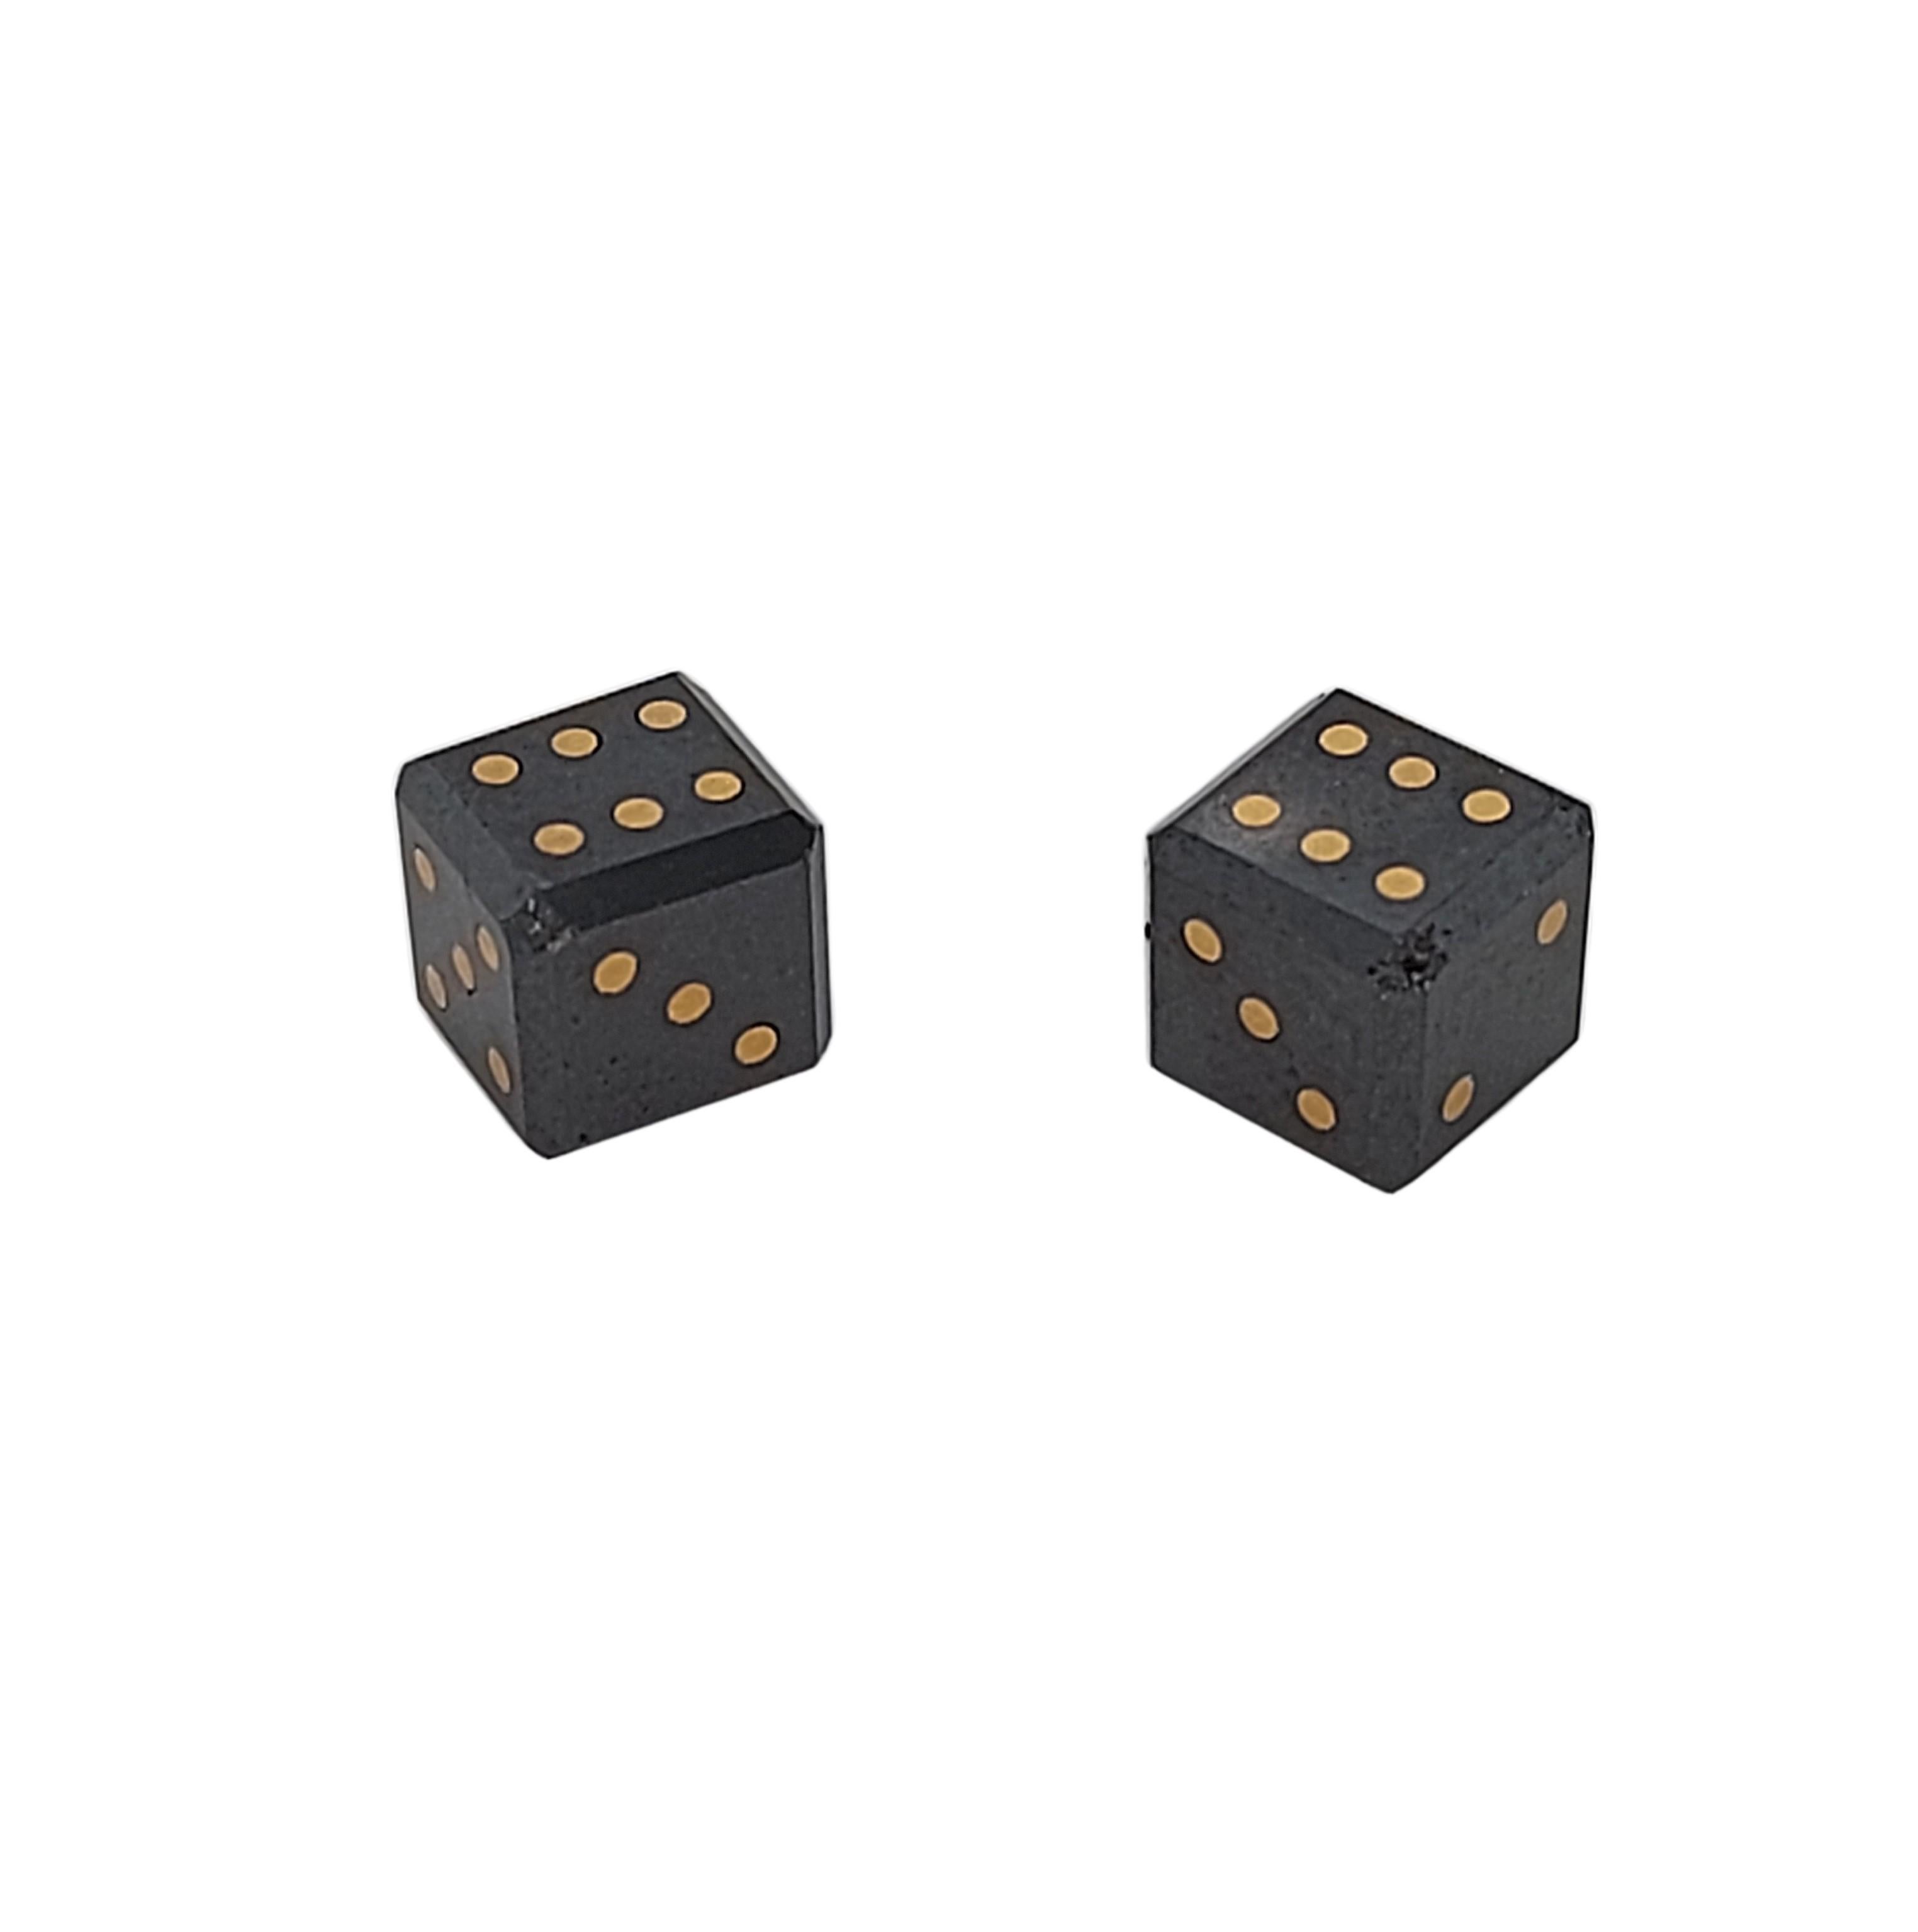 Pair of natural 15,4 Carat Black Diamond Cubes/Dice with gold inlay, 7.5 mm

The dice are inlaid with gold dots to mark their numbers.
The purity of the gold is not tested.

Measurements: 7.5 x 7.5 mm

Total weight: 3.1 gram / 0.110 oz / 2.0